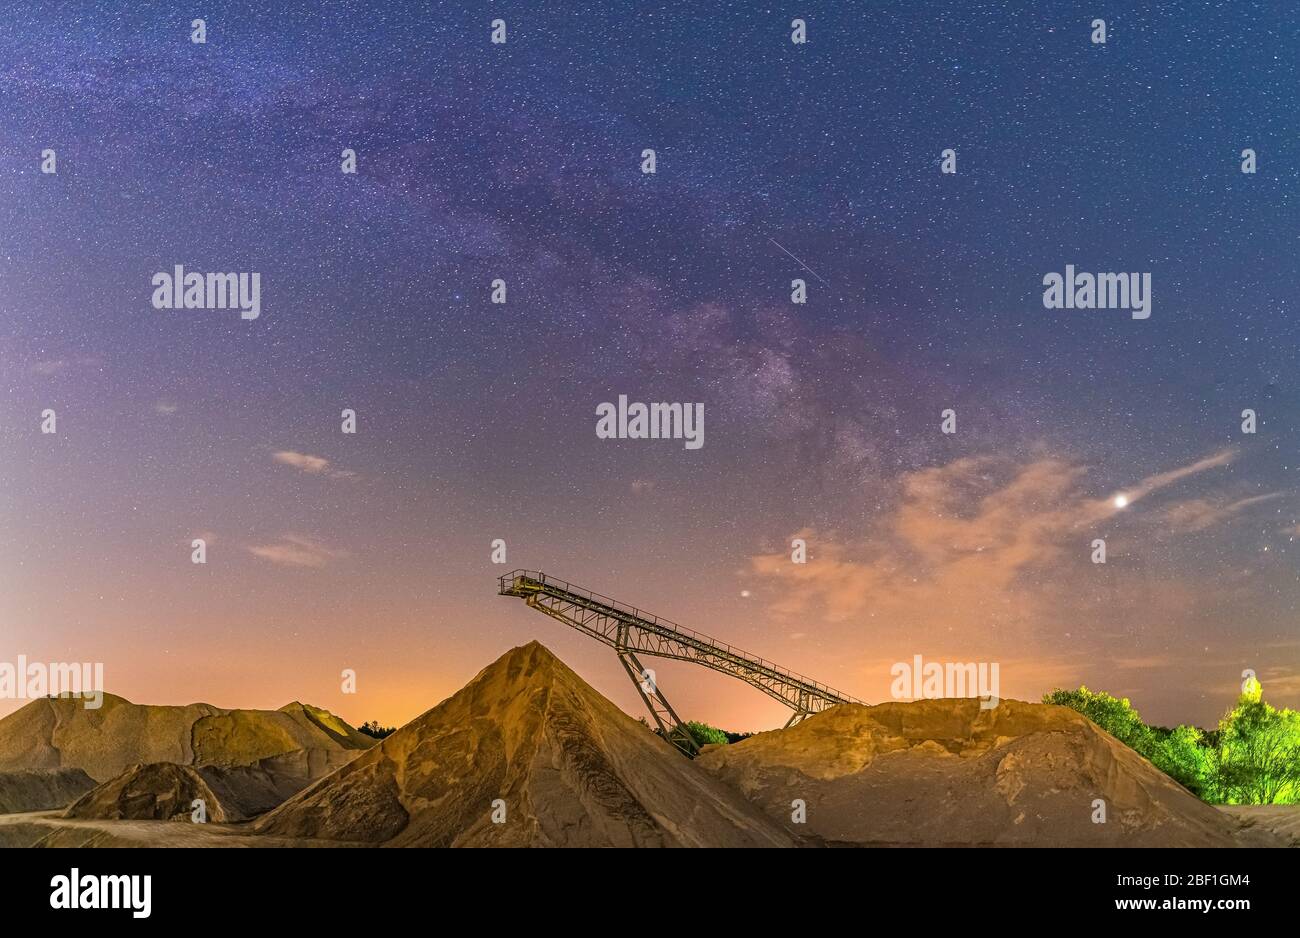 Conveyor bridge at night and milky way, watching the stars at a construction area. Stock Photo